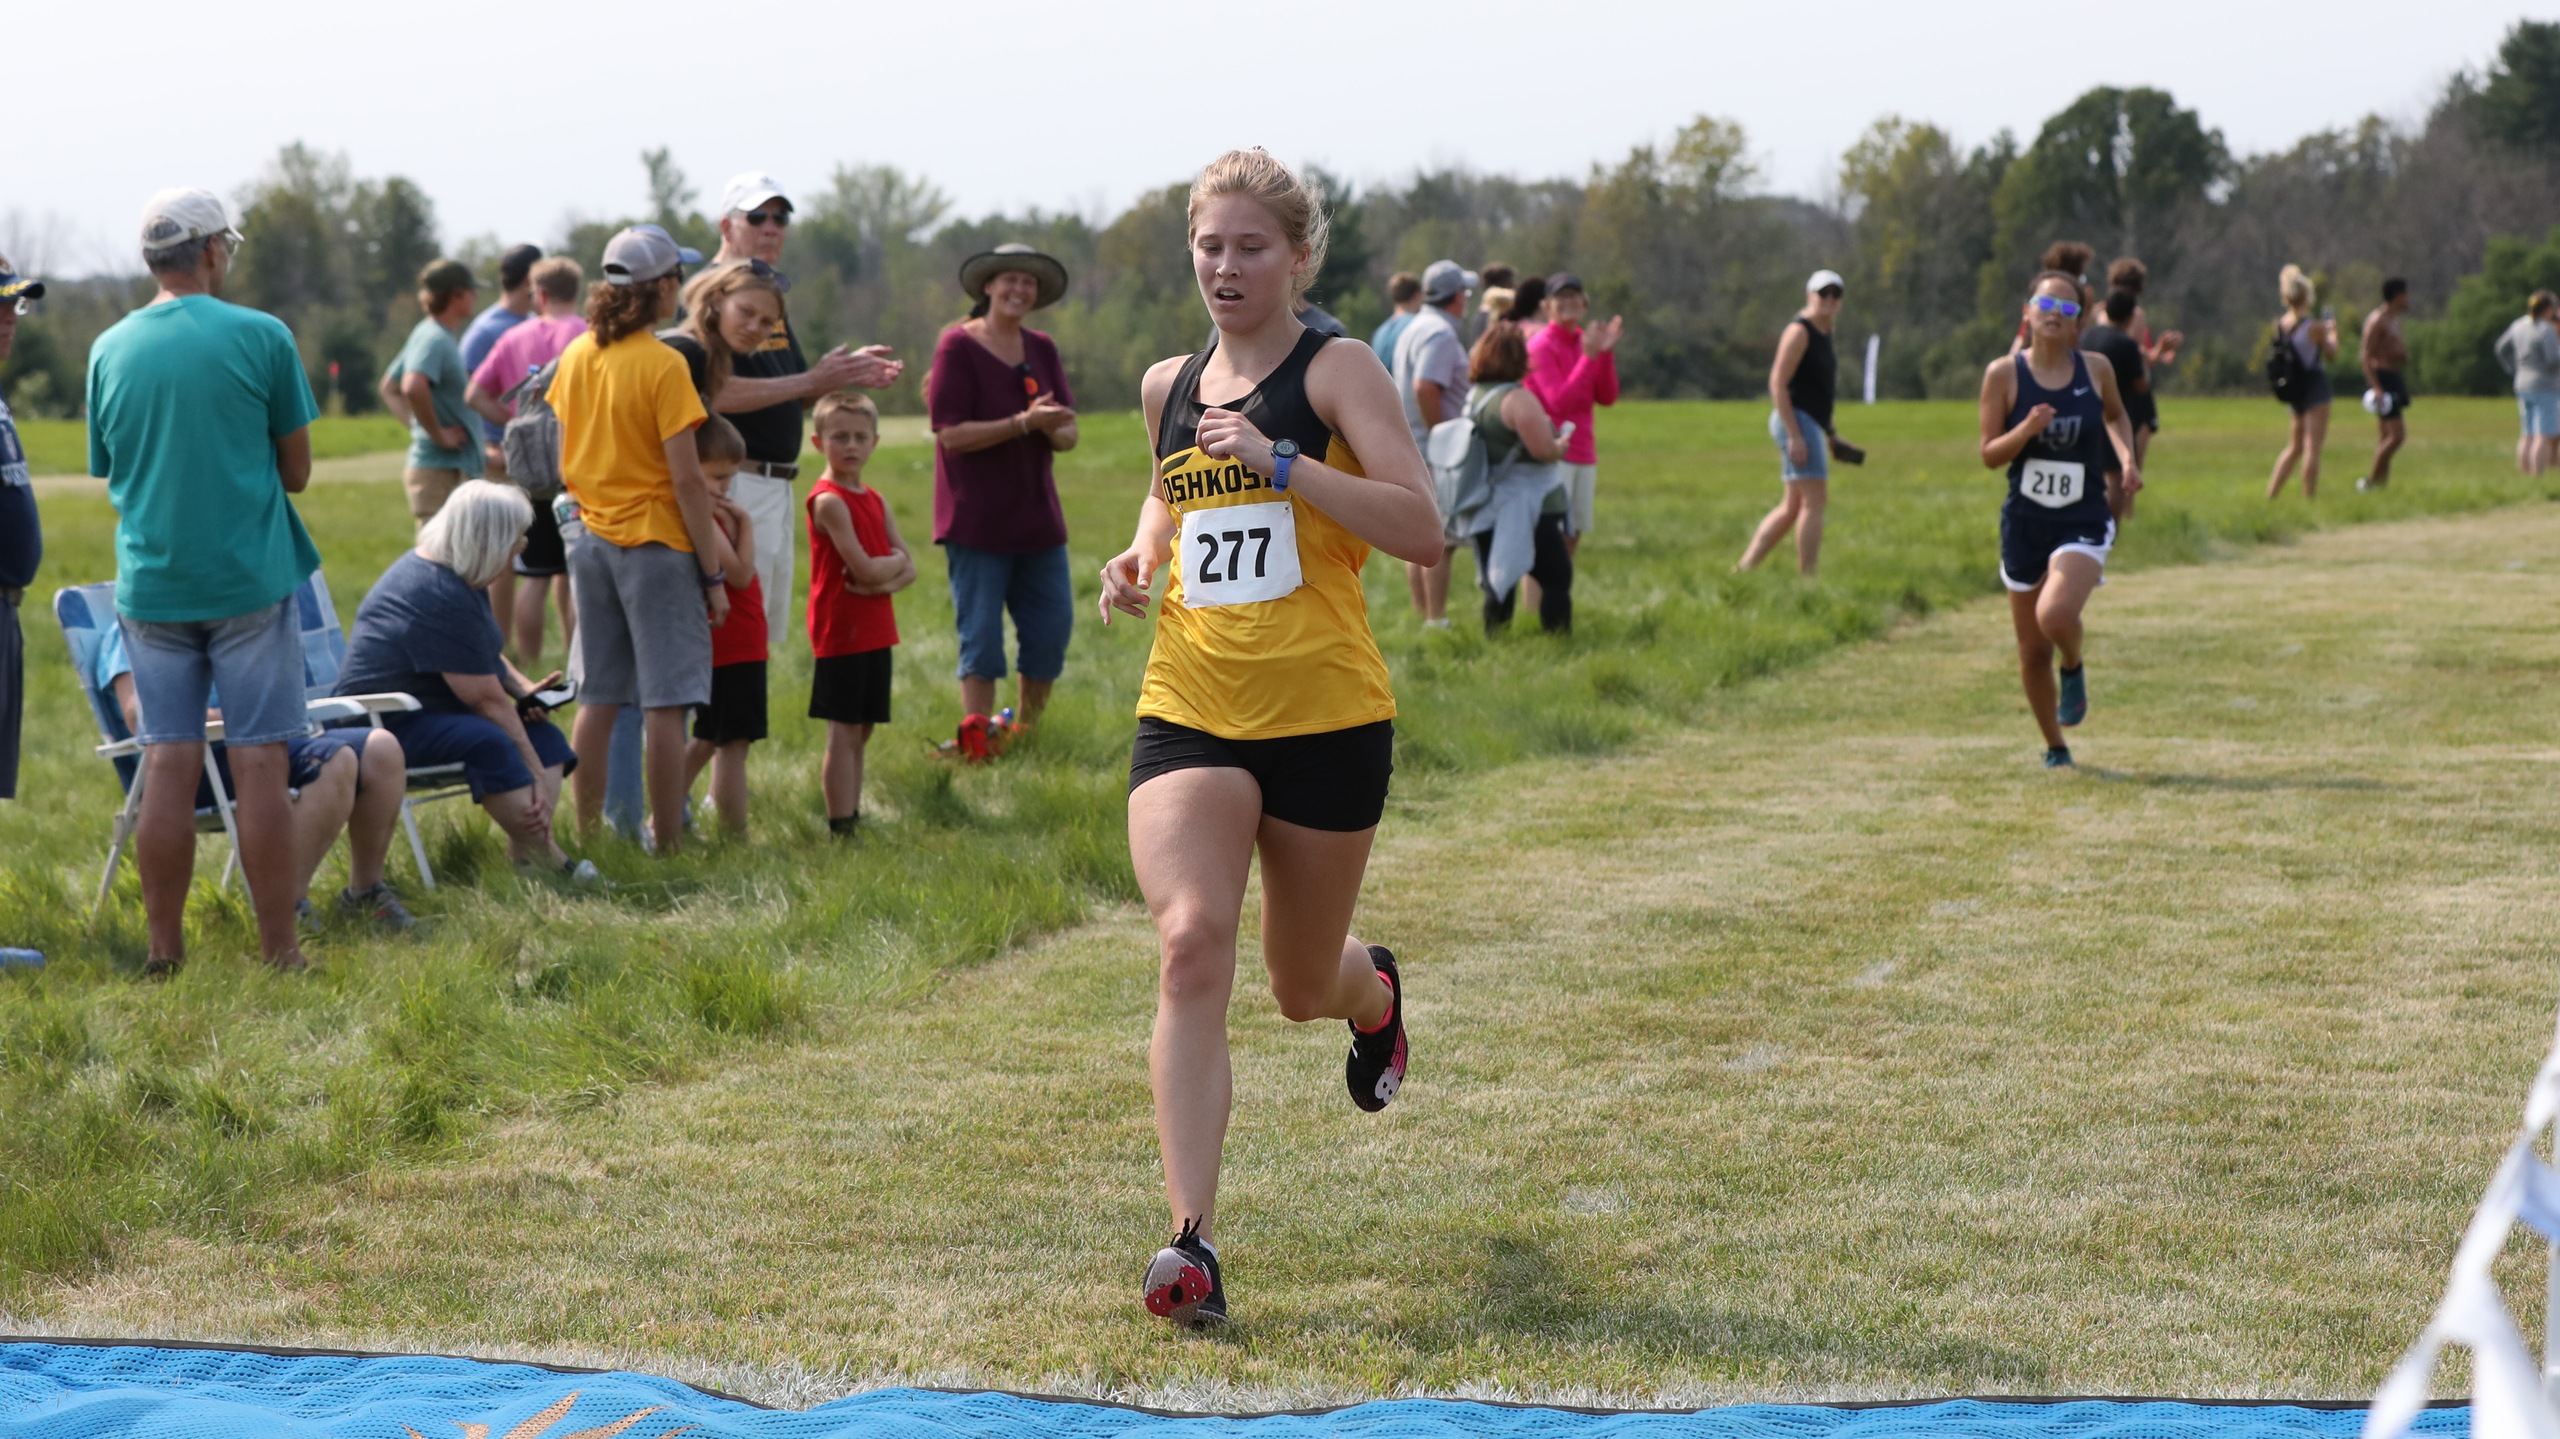 Lauren Young finished 13th for the Titans in her first collegiate race.